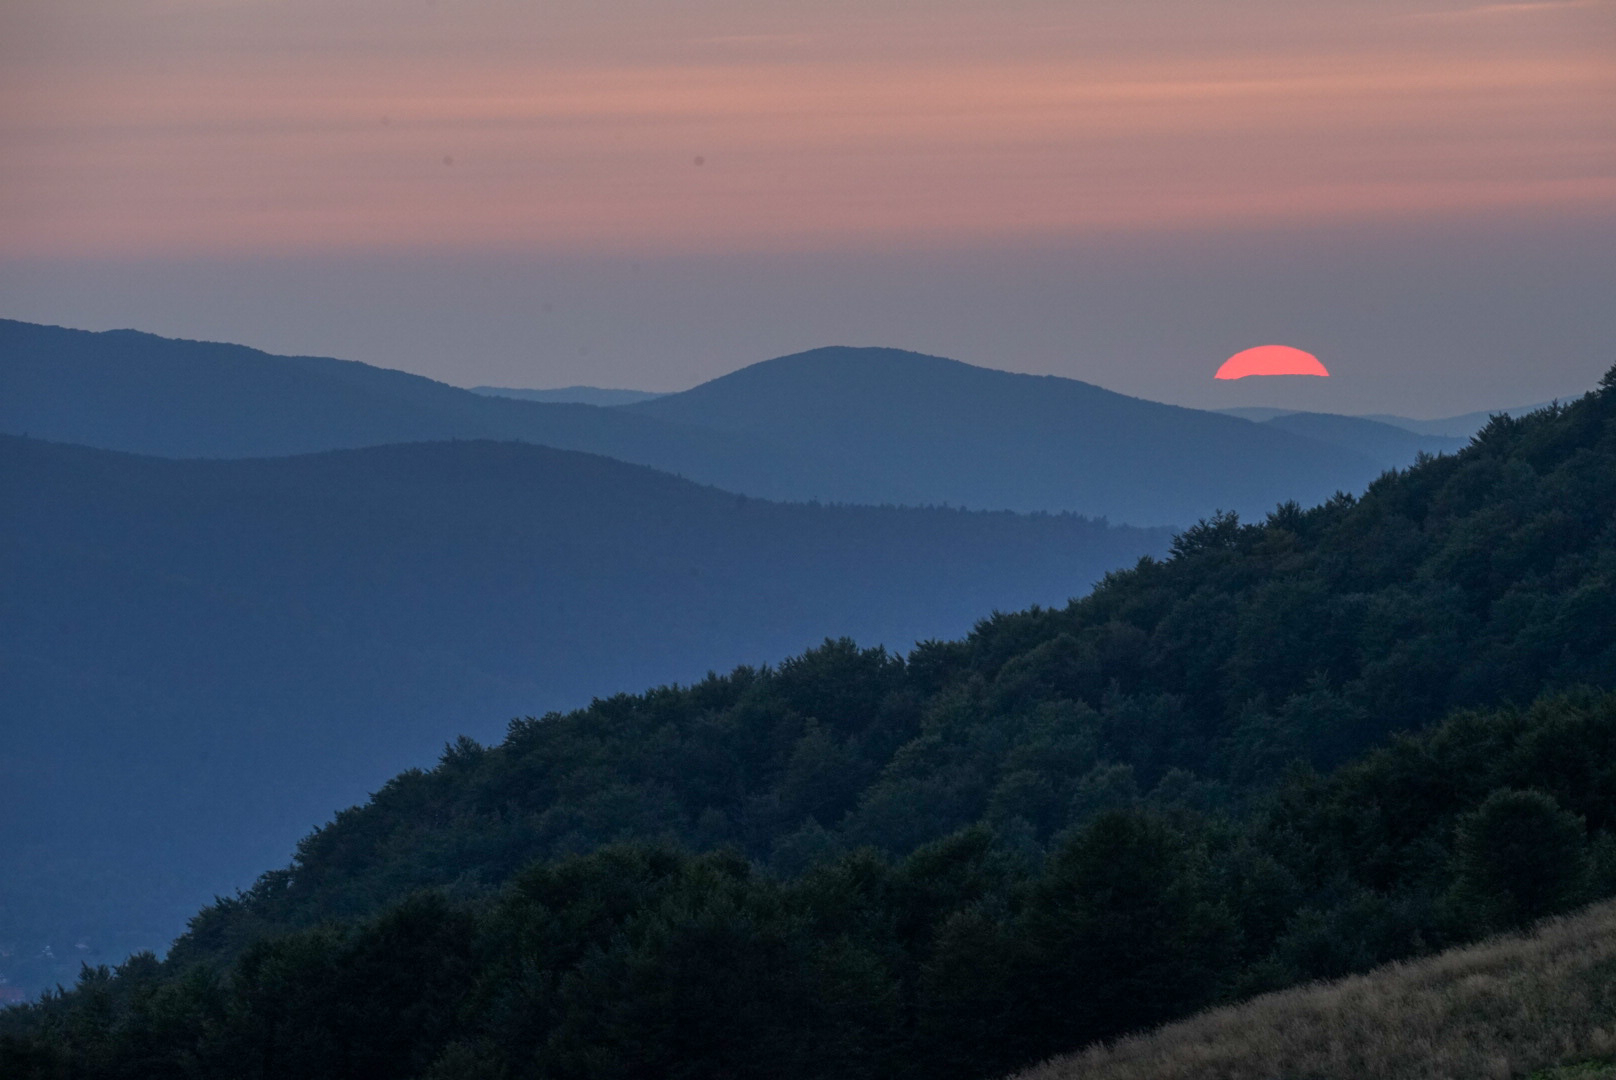 Sunset in the Bieszczady Mountains, Poland